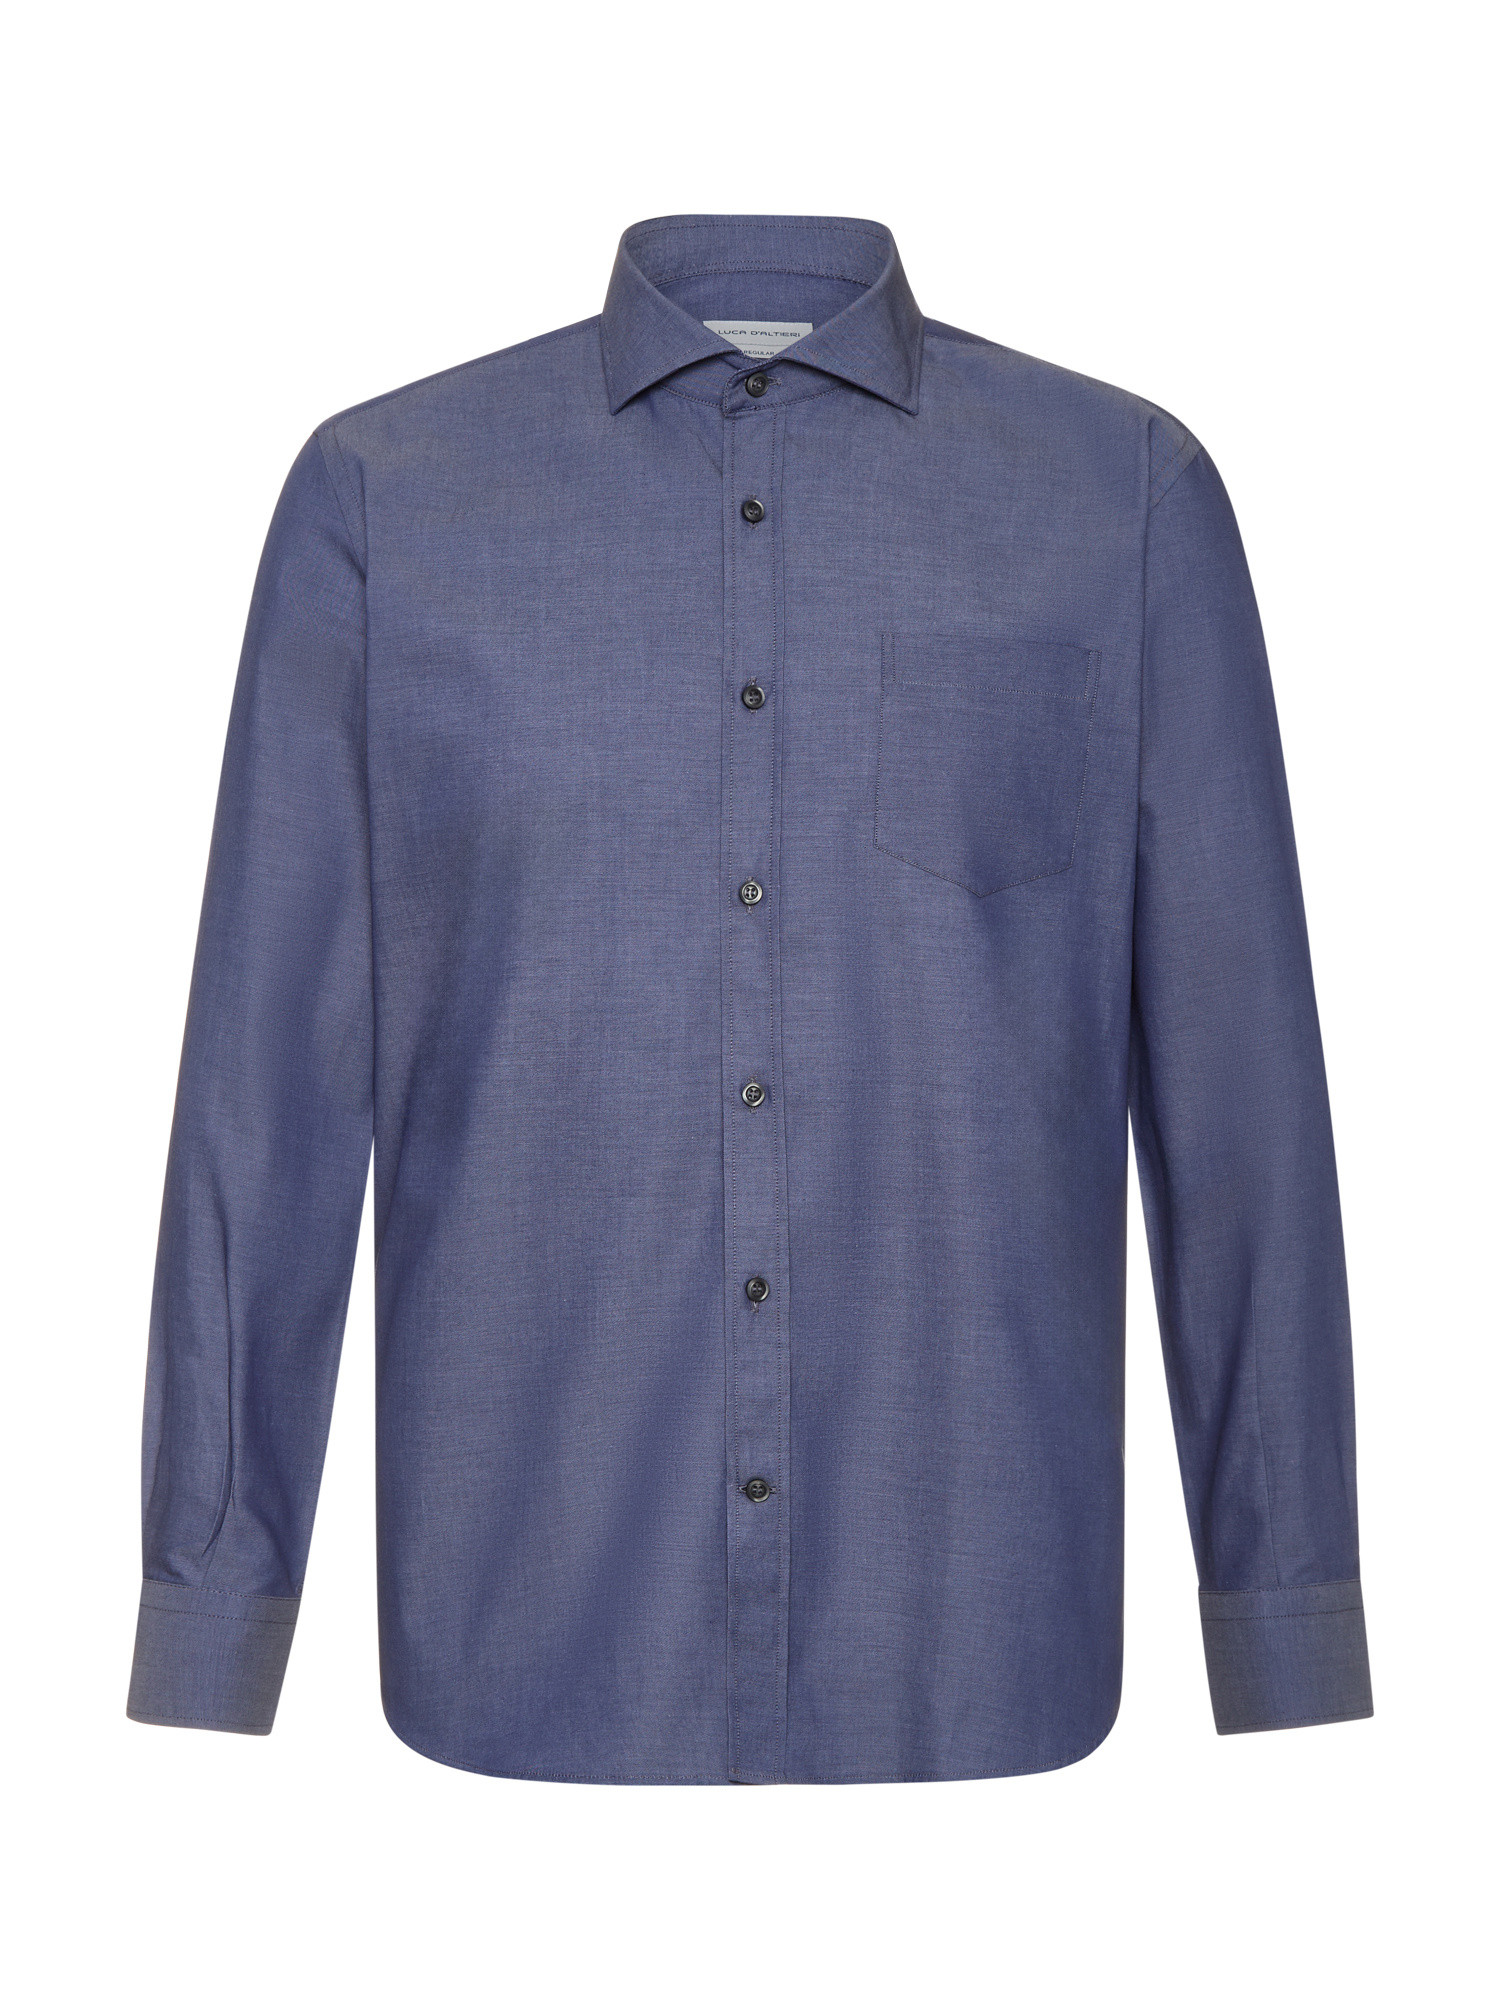 Luca D'Altieri - Regular fit casual shirt in pure cotton twill, Blue, large image number 1